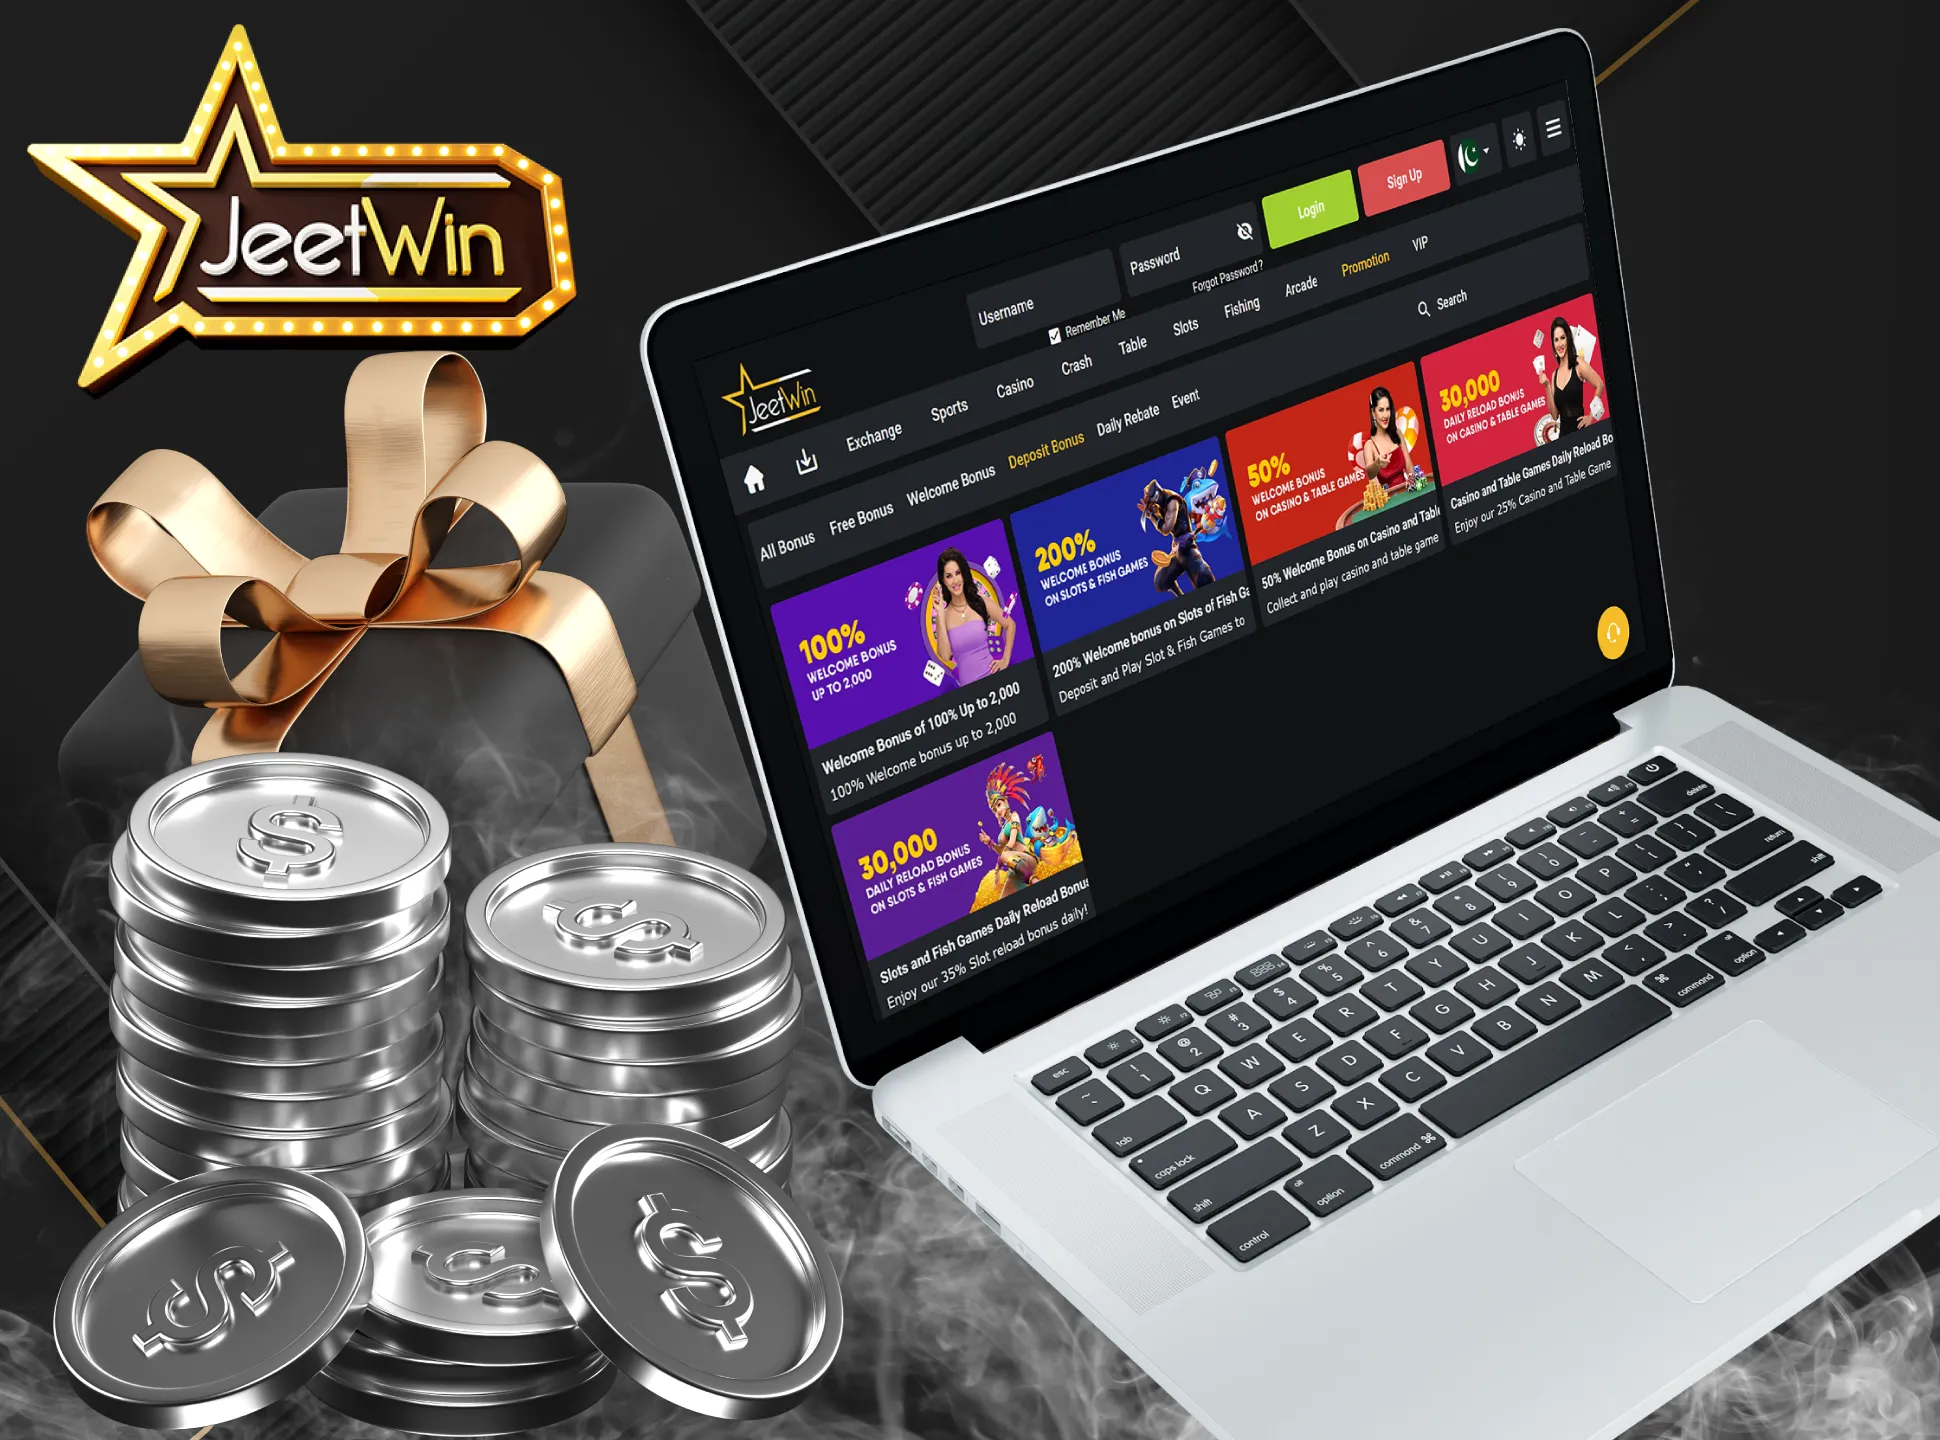 JeetWin online casino players can earn daily bonuses.